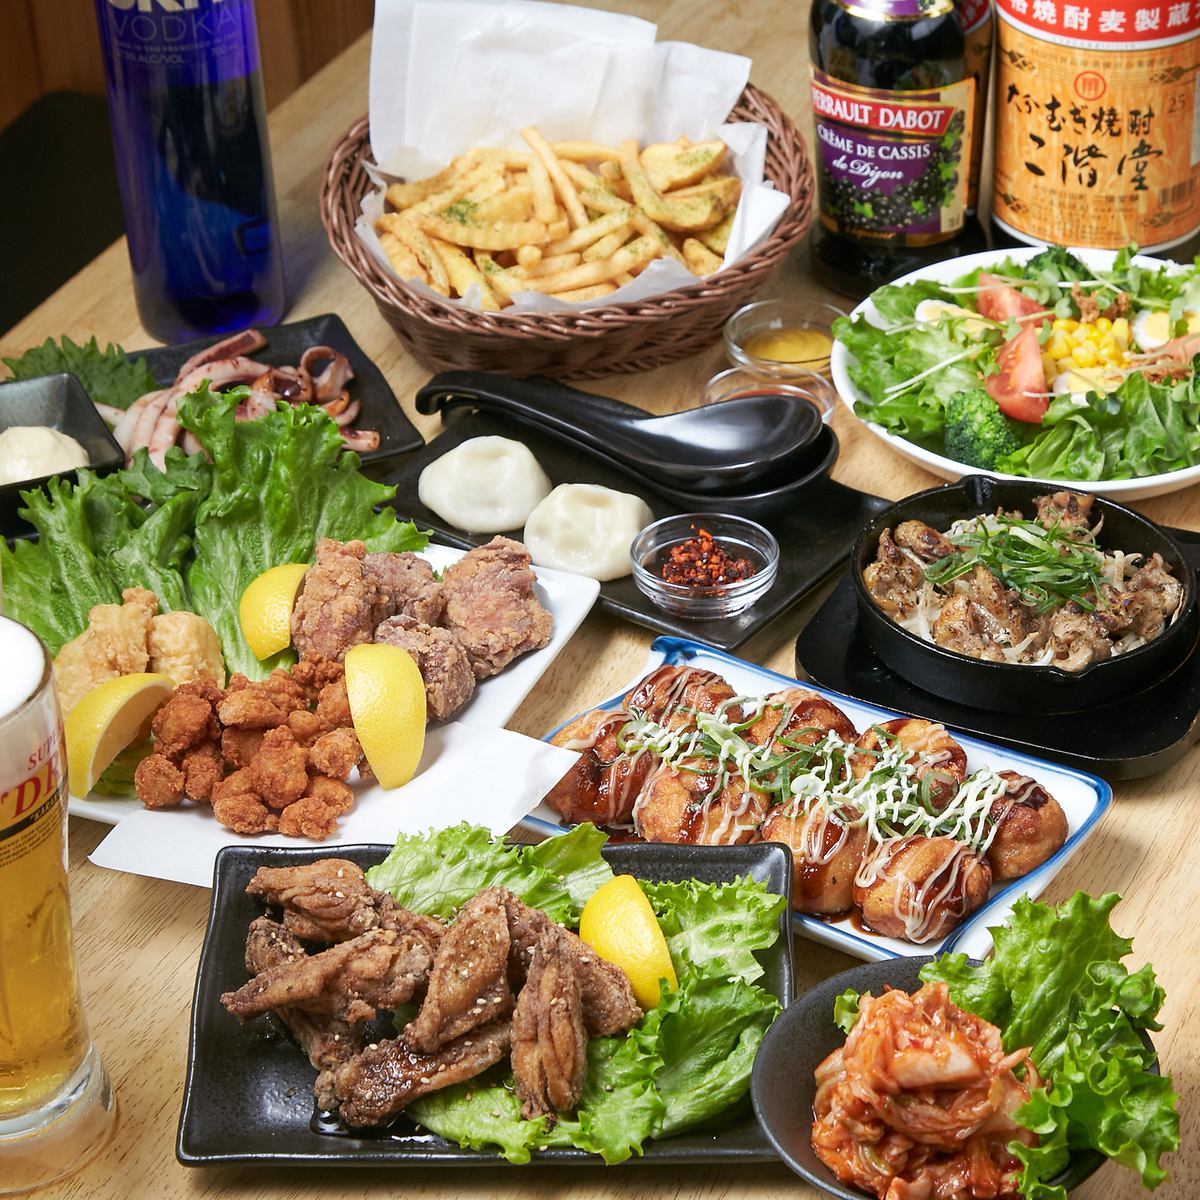 All-you-can-drink draft beer for an additional 250 yen for each course. Perfect for banquets and girls-only gatherings.